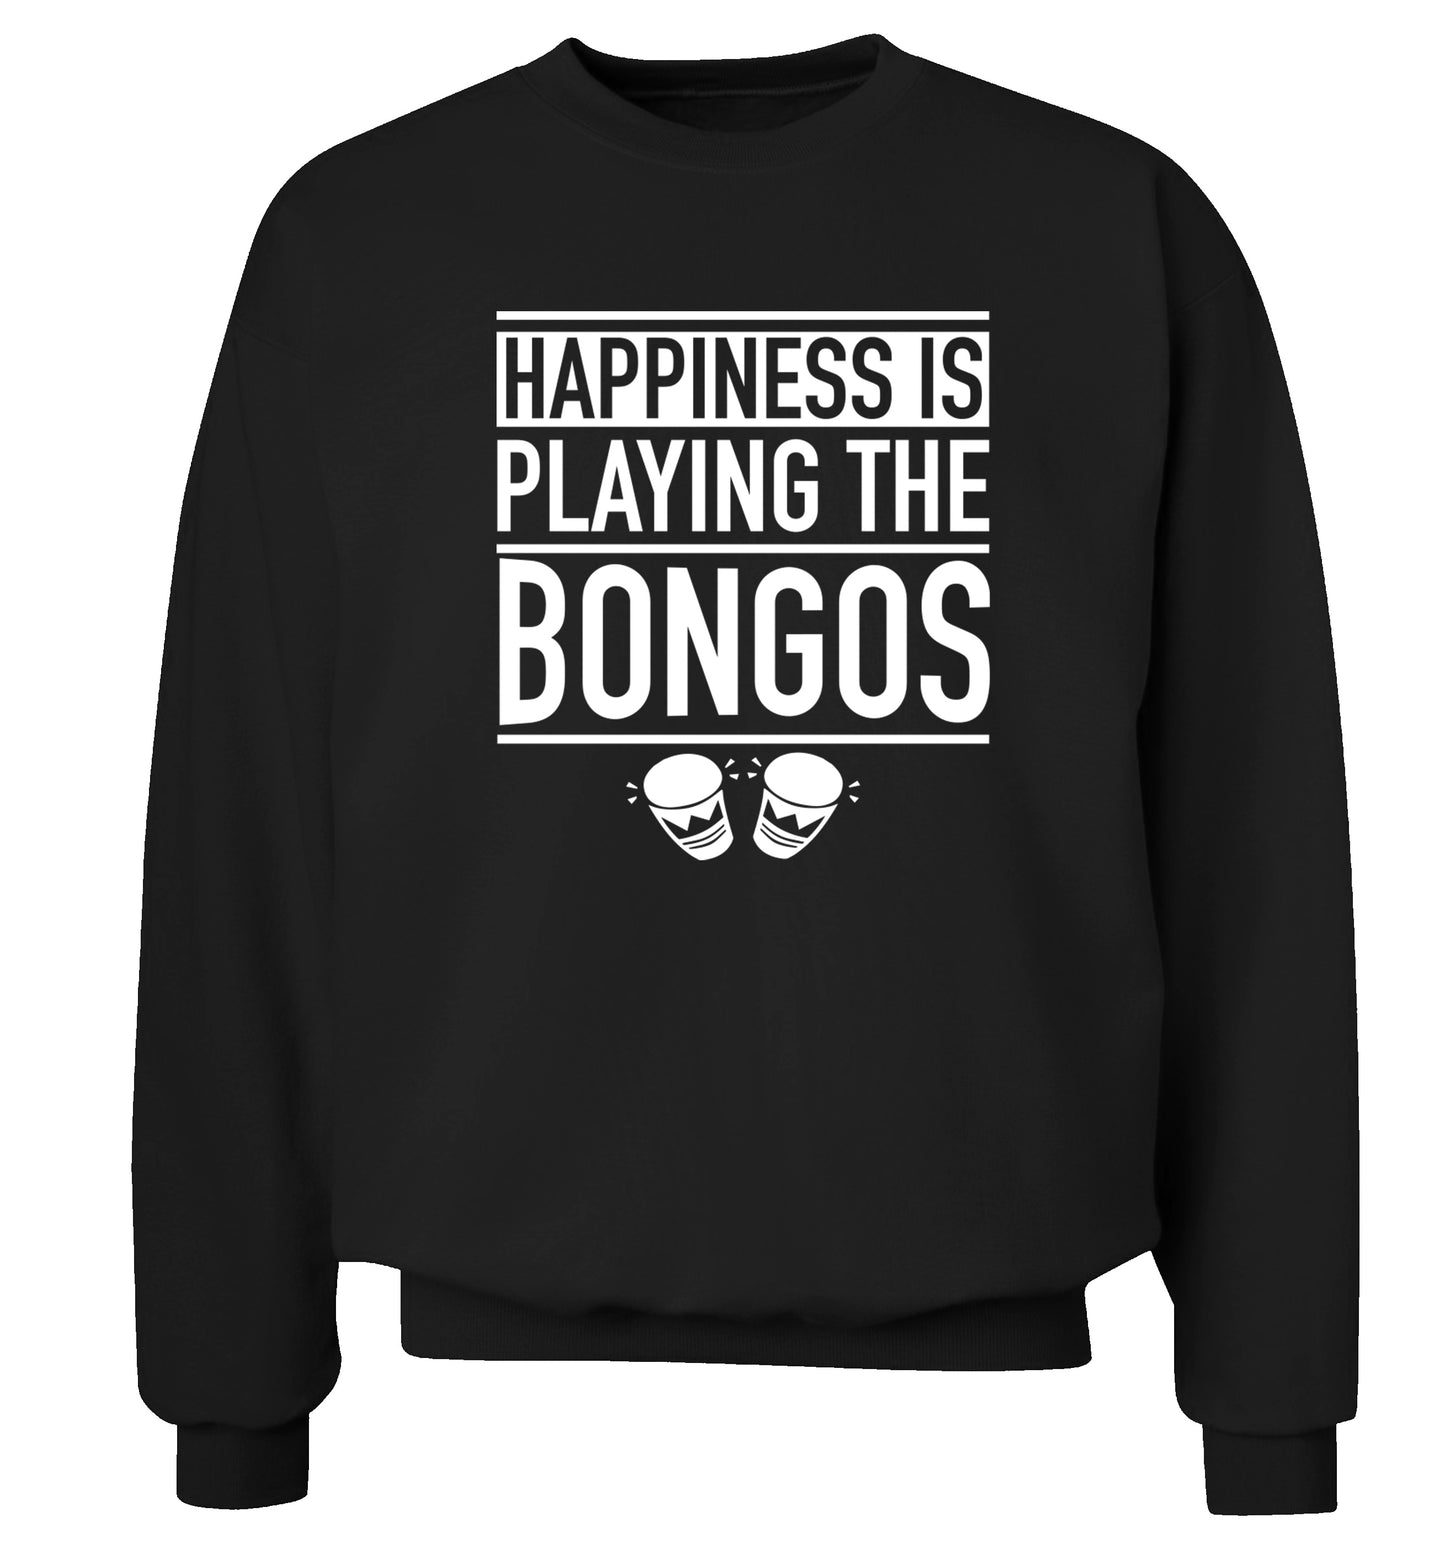 Happiness is playing the bongos Adult's unisex black Sweater 2XL